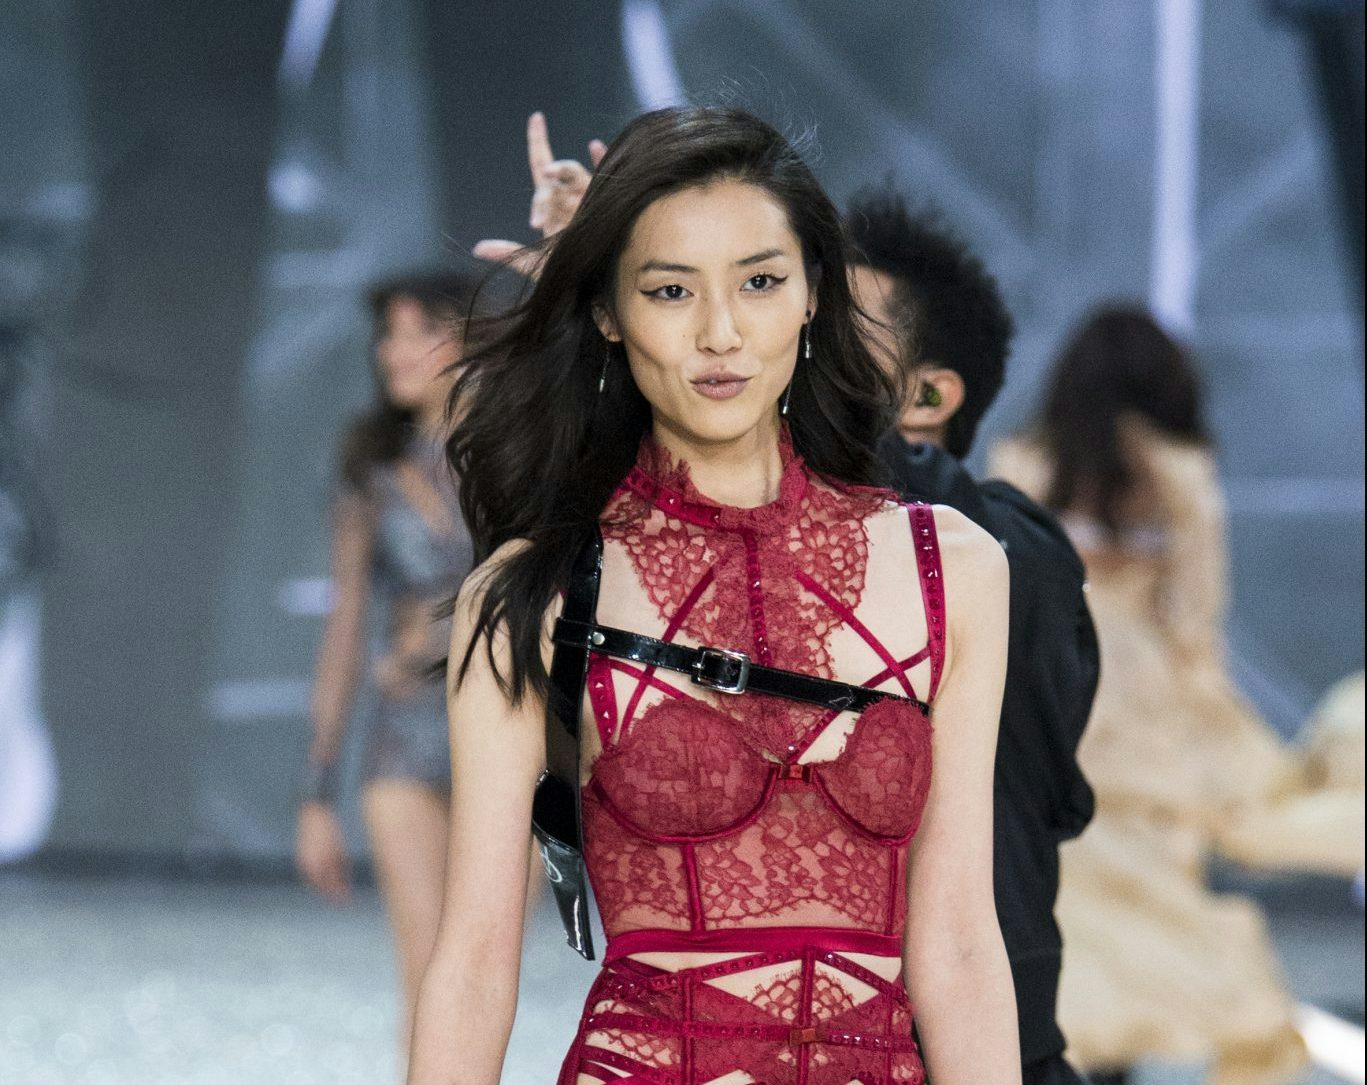 Tickets to Victoria's Secret's 'Invite-Only' Show Are Selling for $13,700 in China